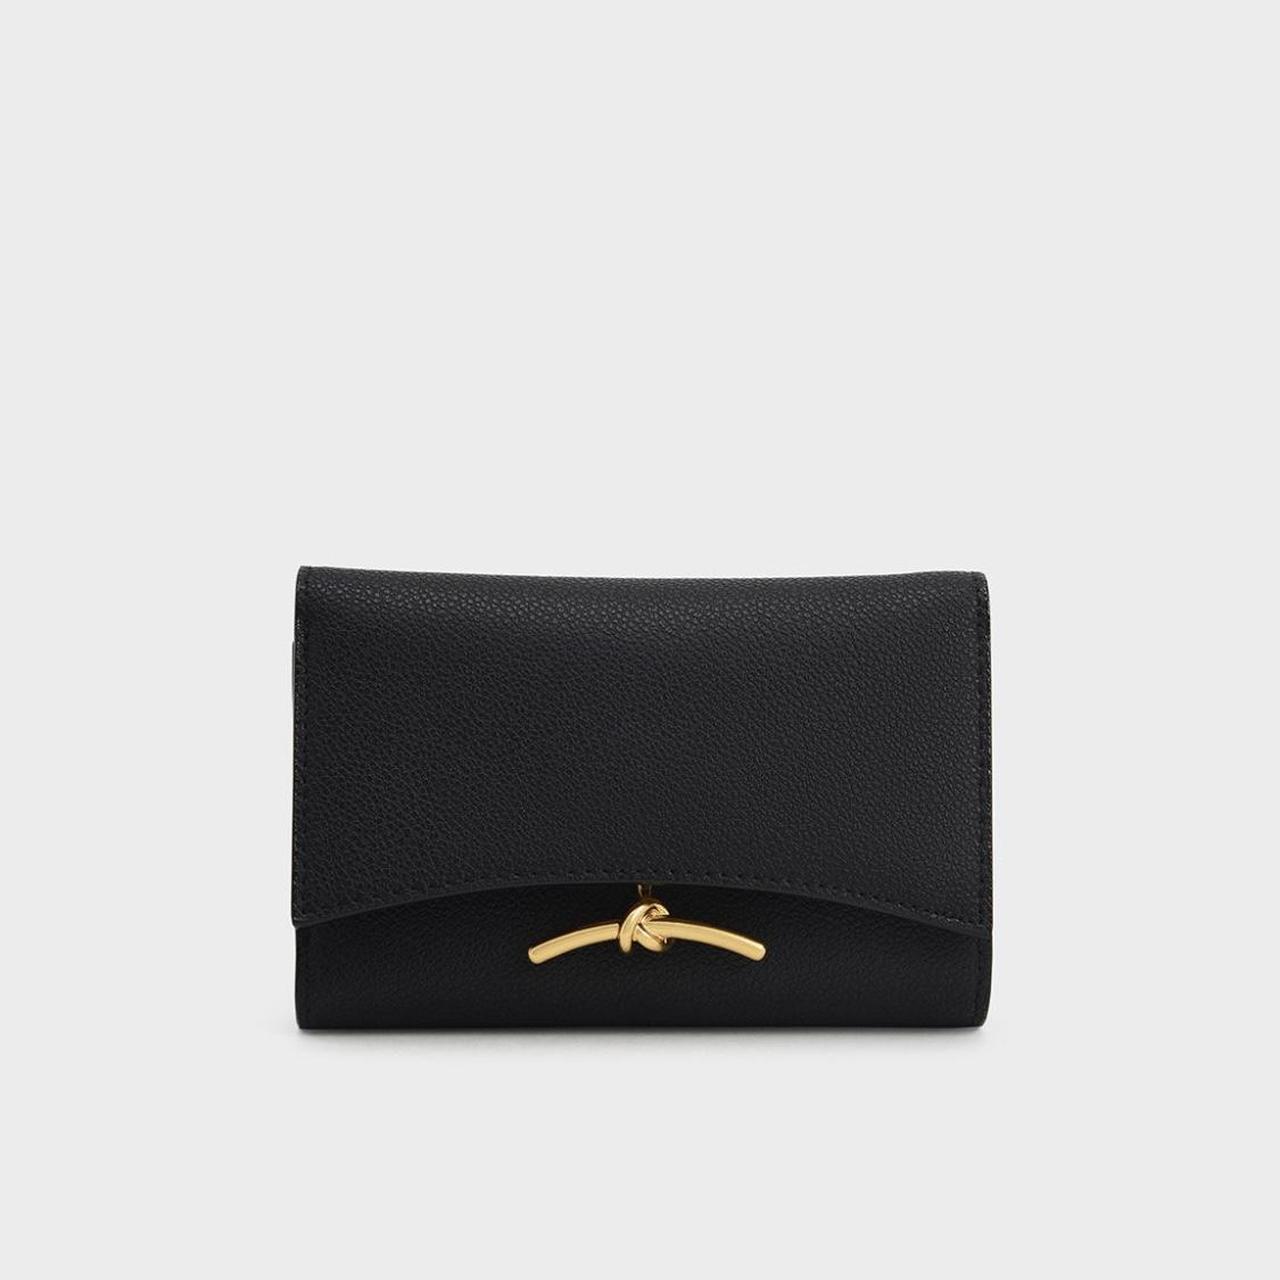 Charles & Keith Women's Black and Gold Wallet-purses (2)